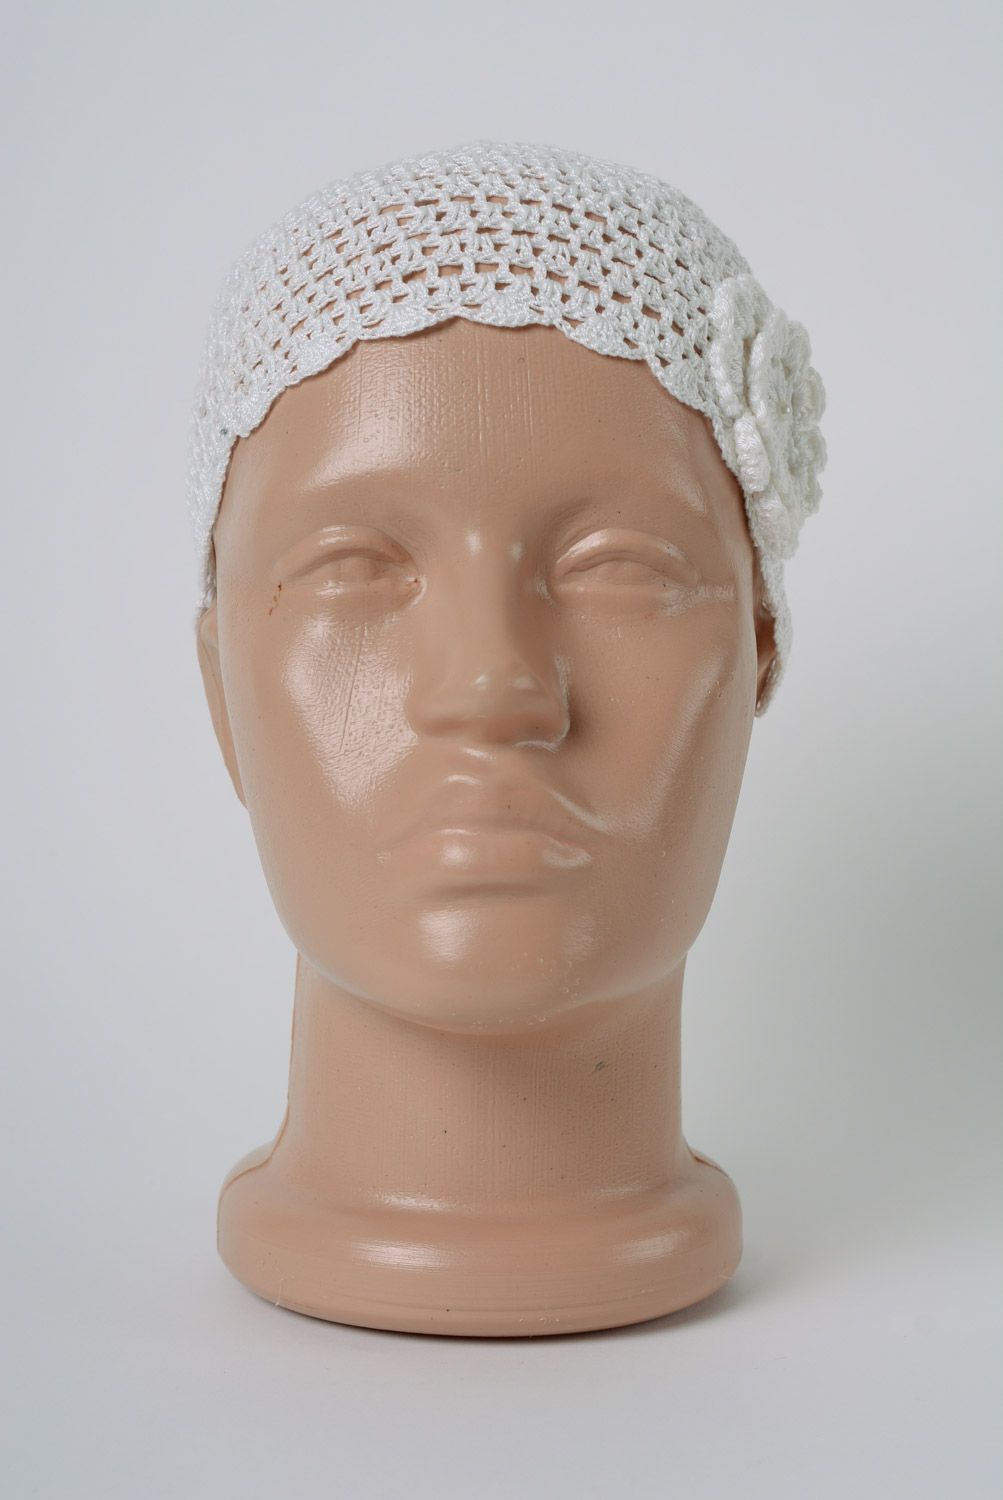 Handmade white lacy hat crocheted of cotton threads with flowers and beads photo 4